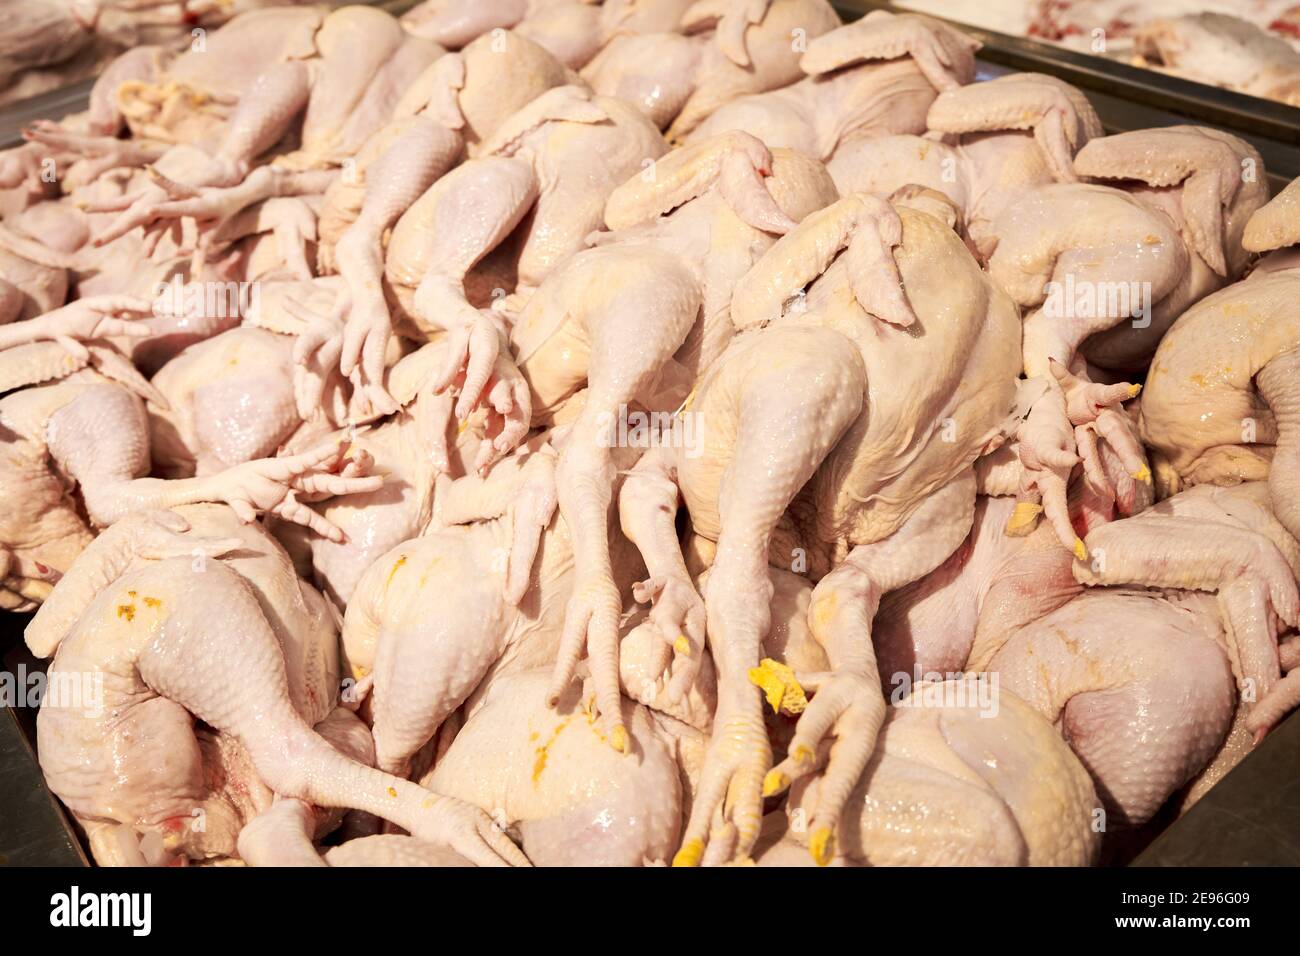 Plucked carcasses of chickens on the counter of a grocery store. Stock Photo